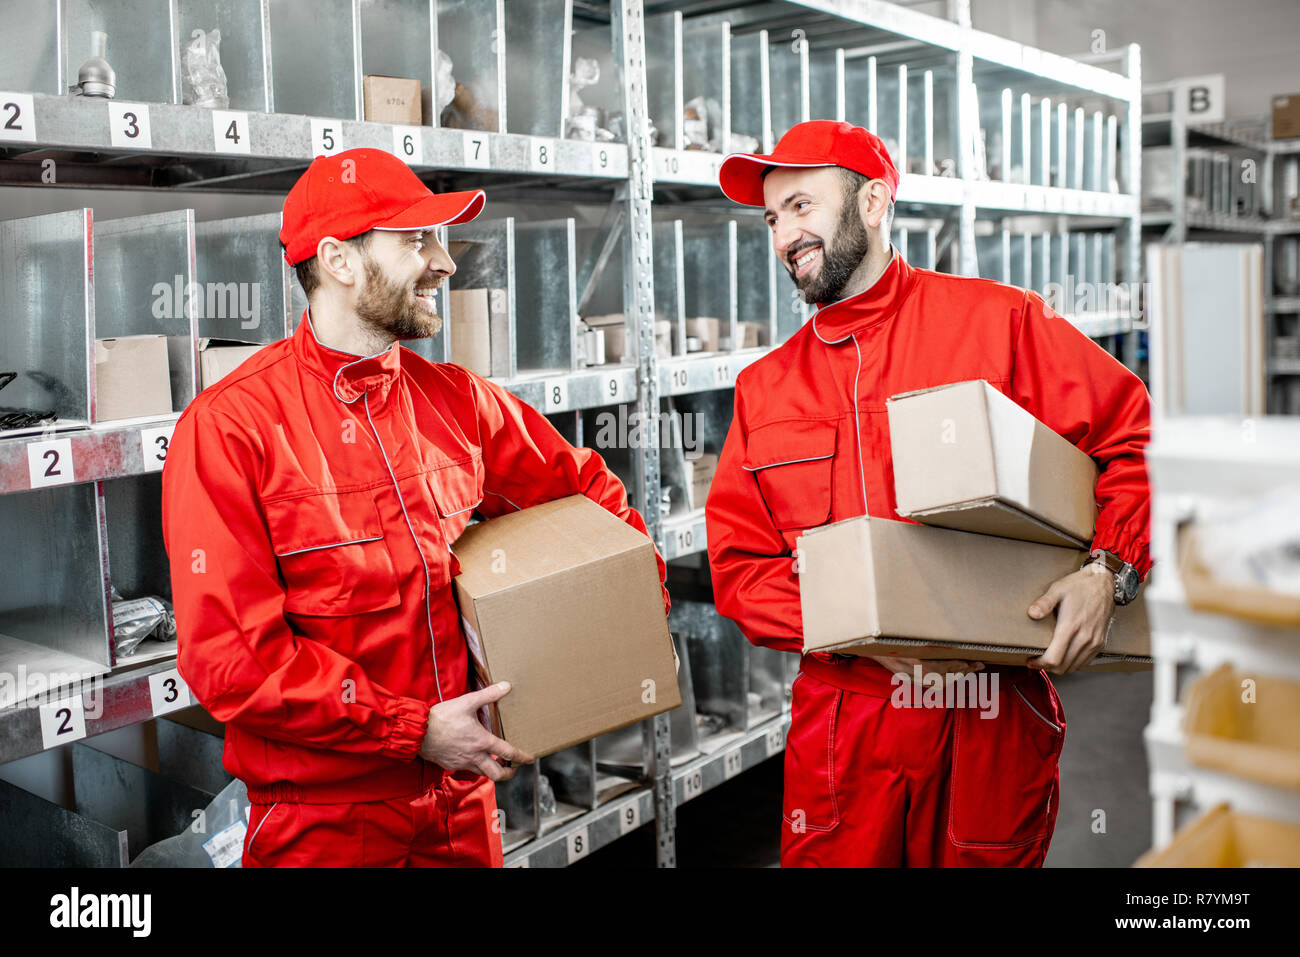 Two handsome warehouse workers in red uniform standing together with boxes in the storage with auto parts or other products Stock Photo